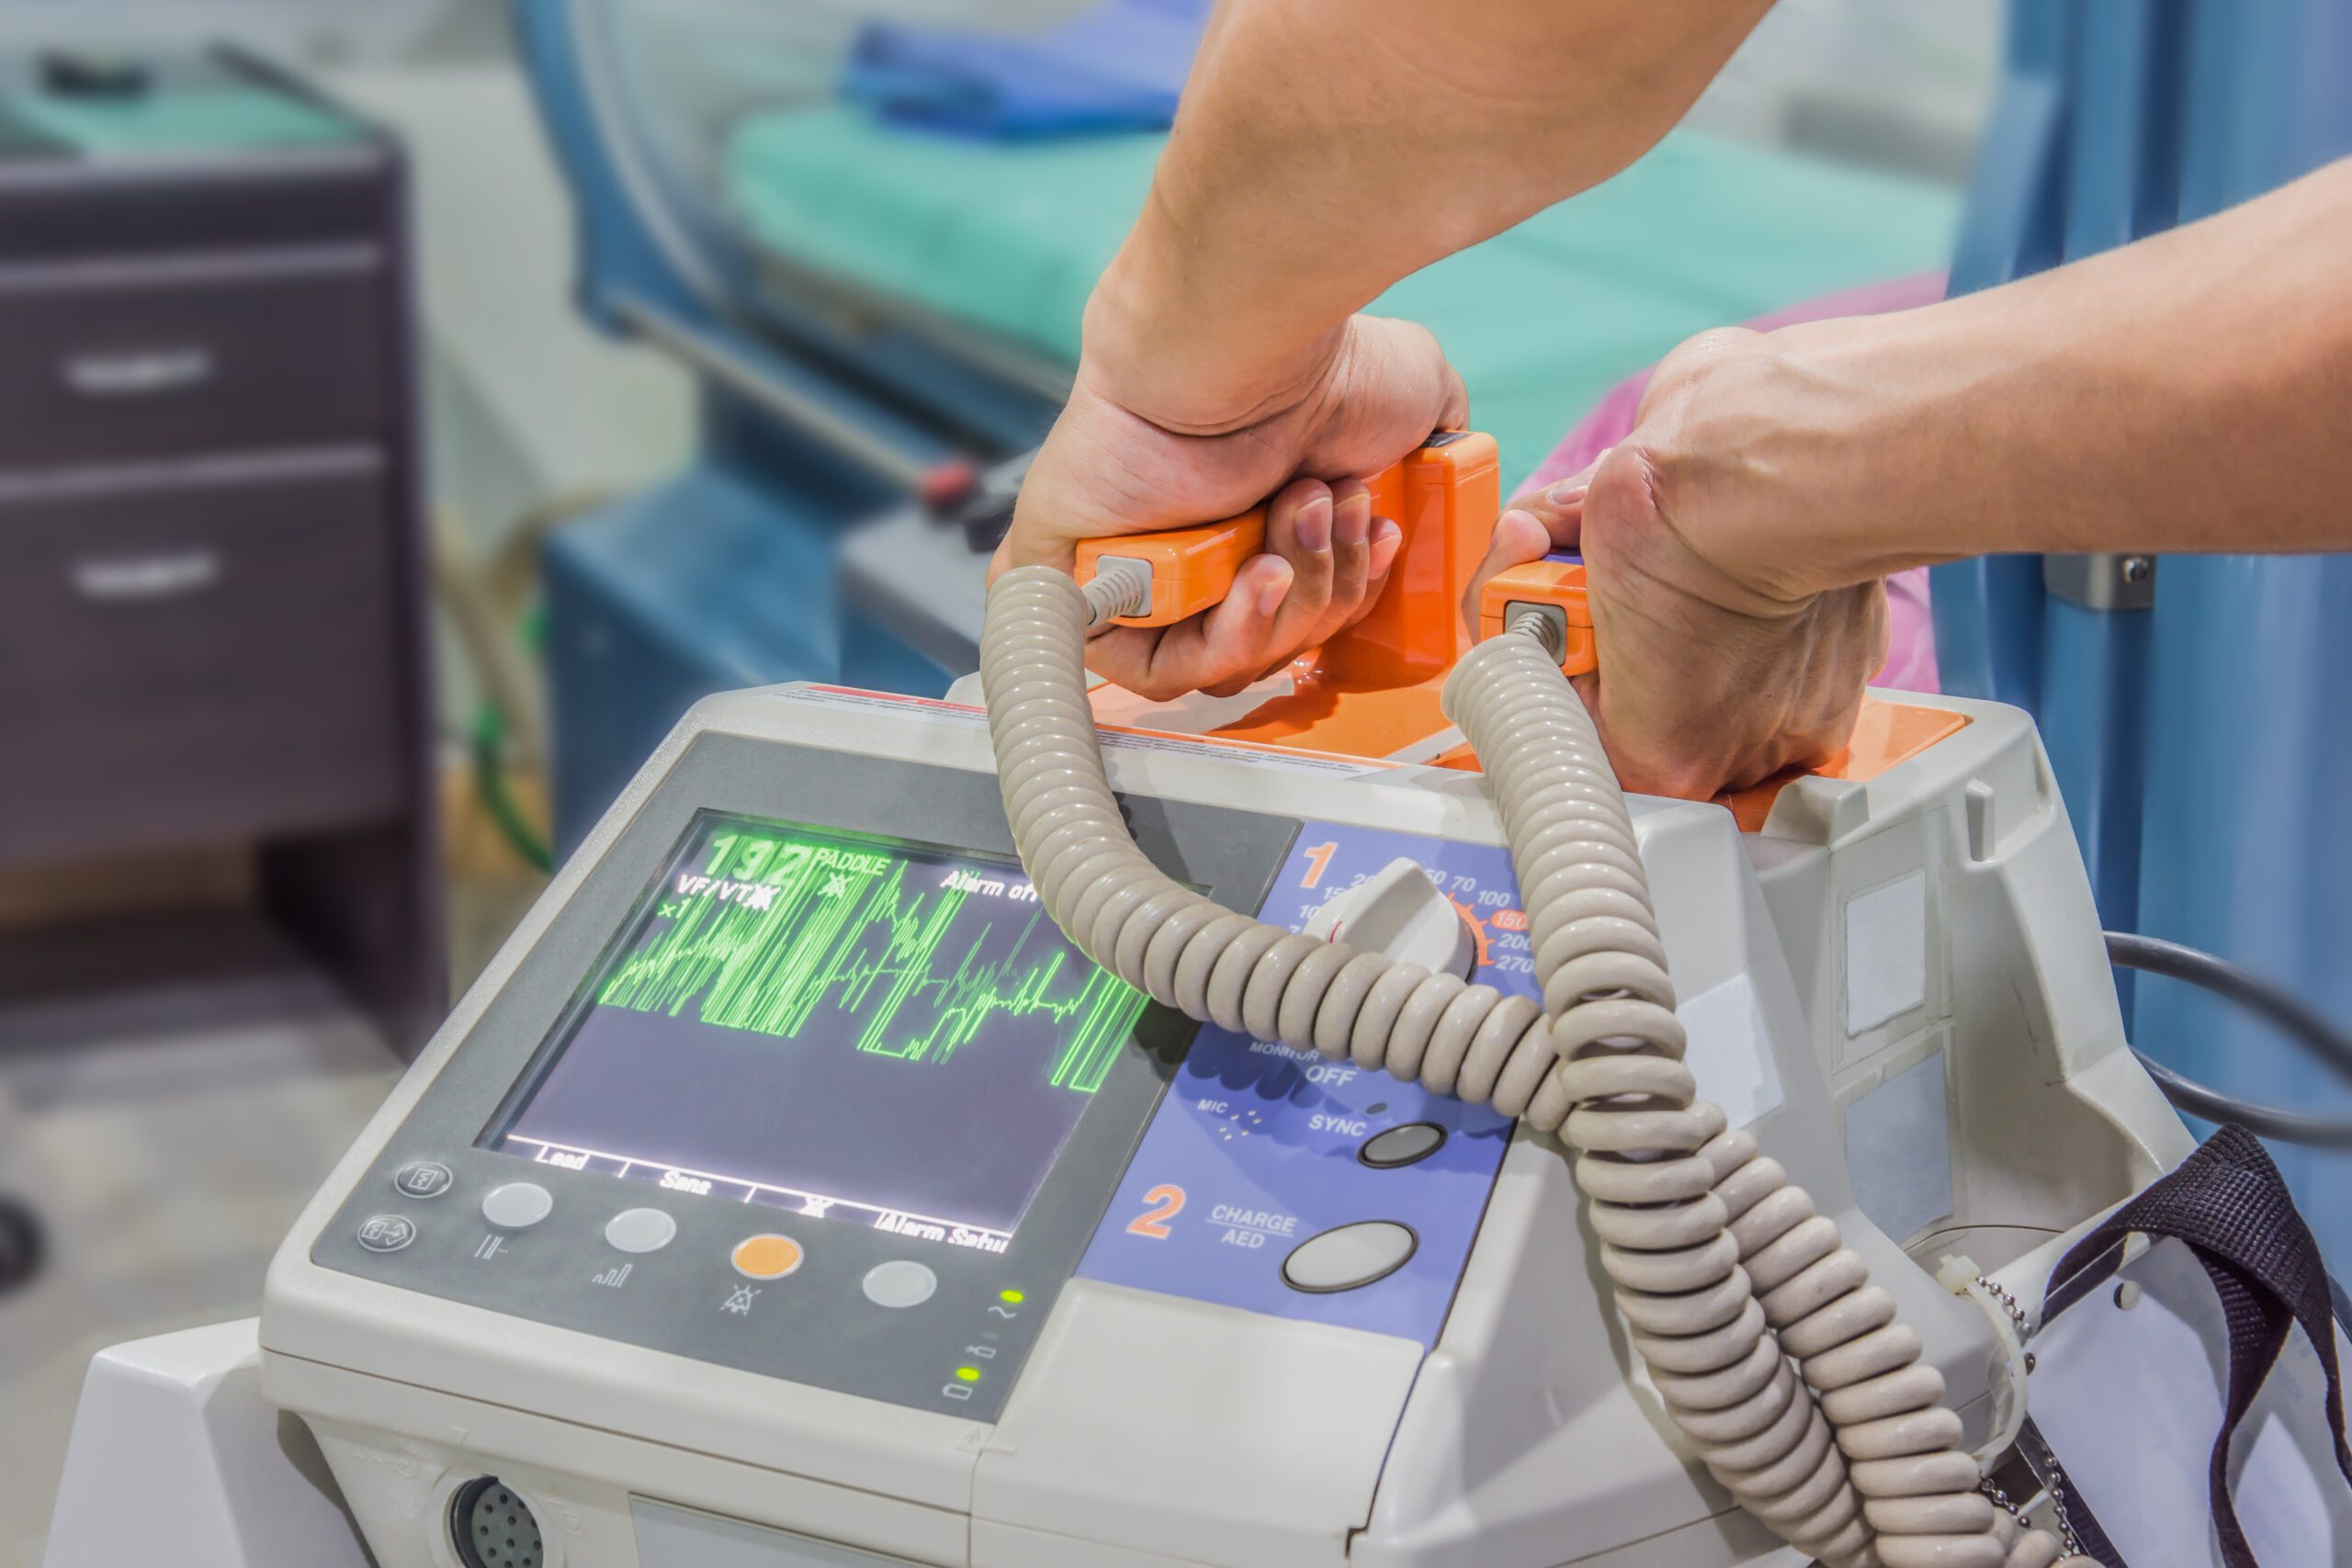 A person charges a defibrillator machine to prepare for use.